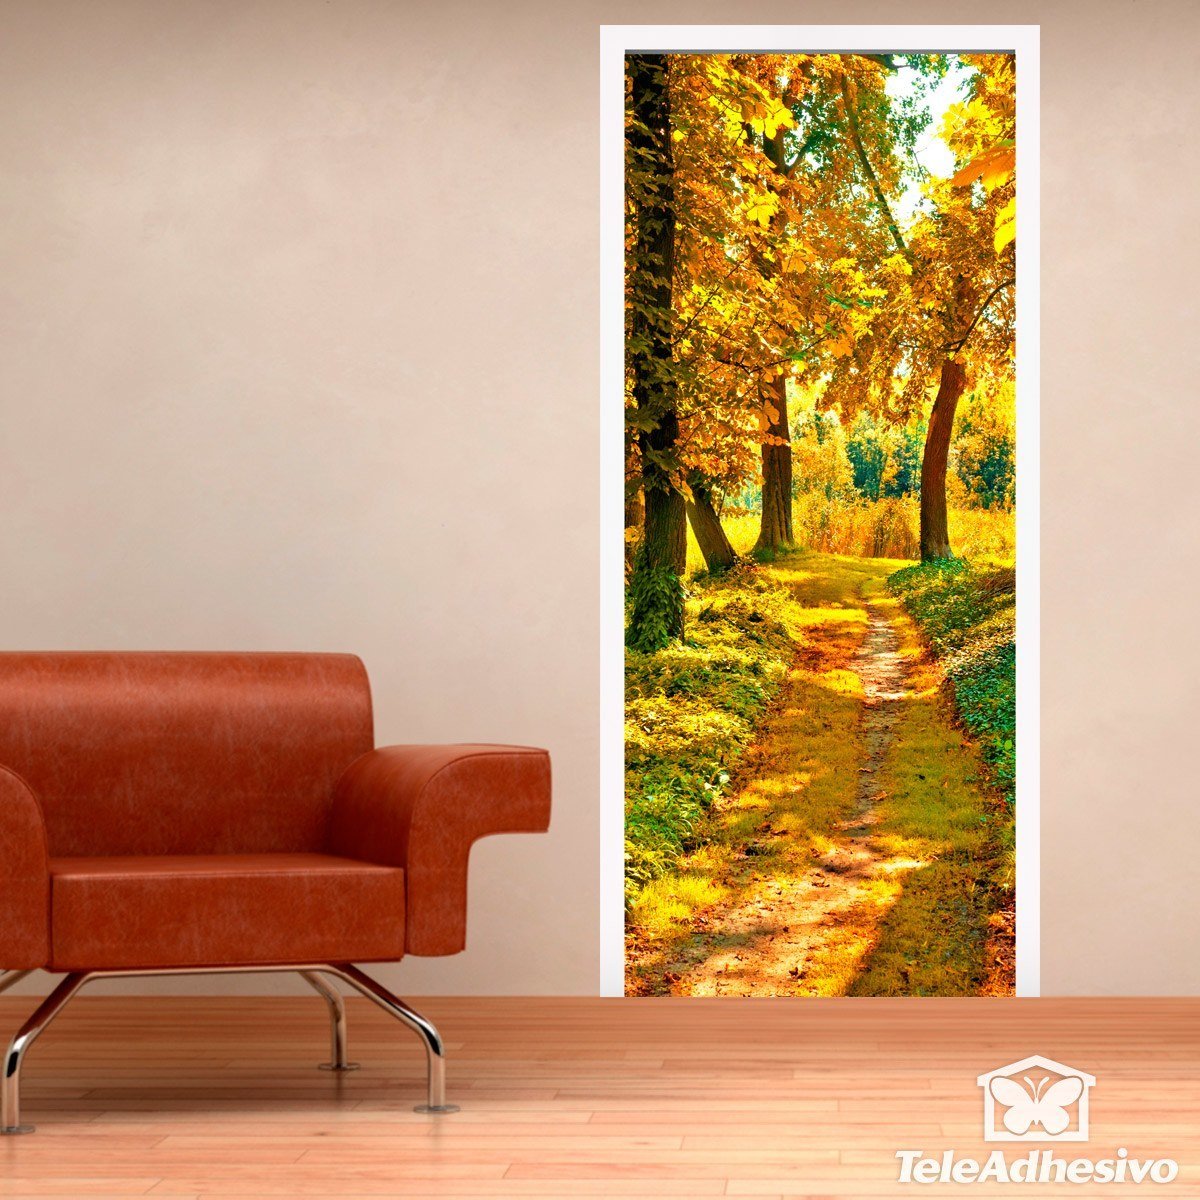 Wall Stickers: Forest path in autumn